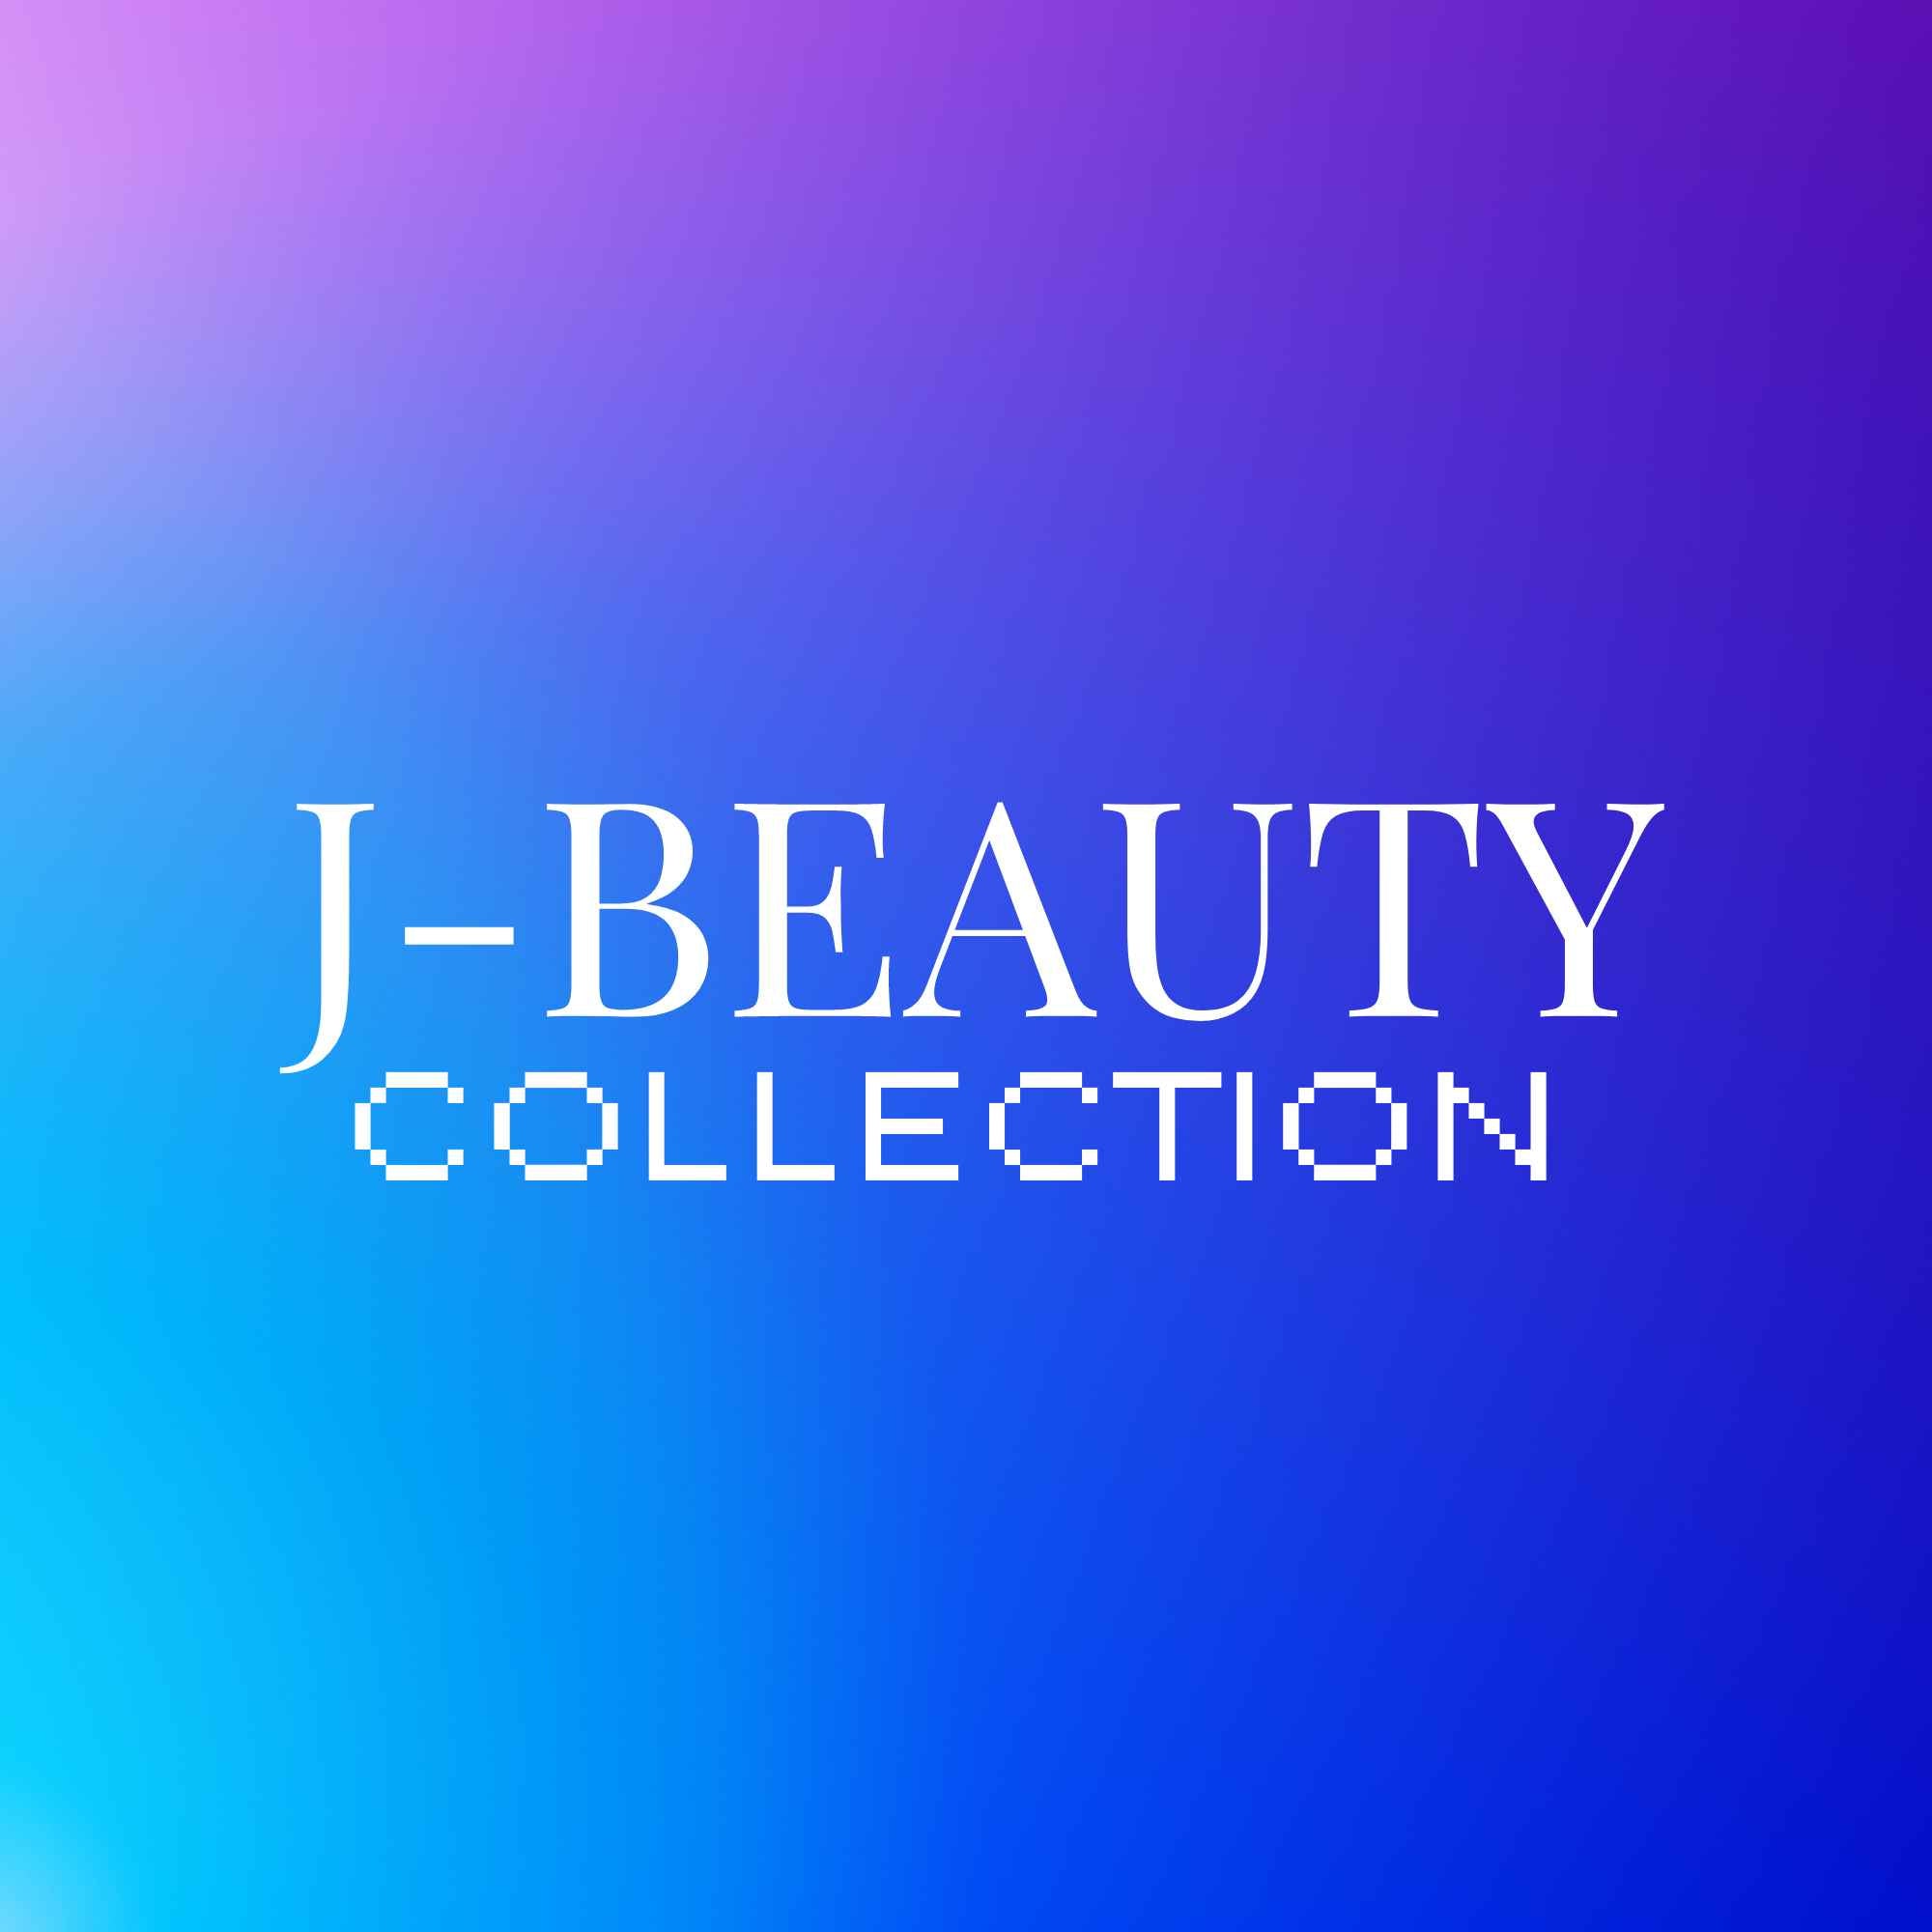 An Image Icon showing J-beauty collection text